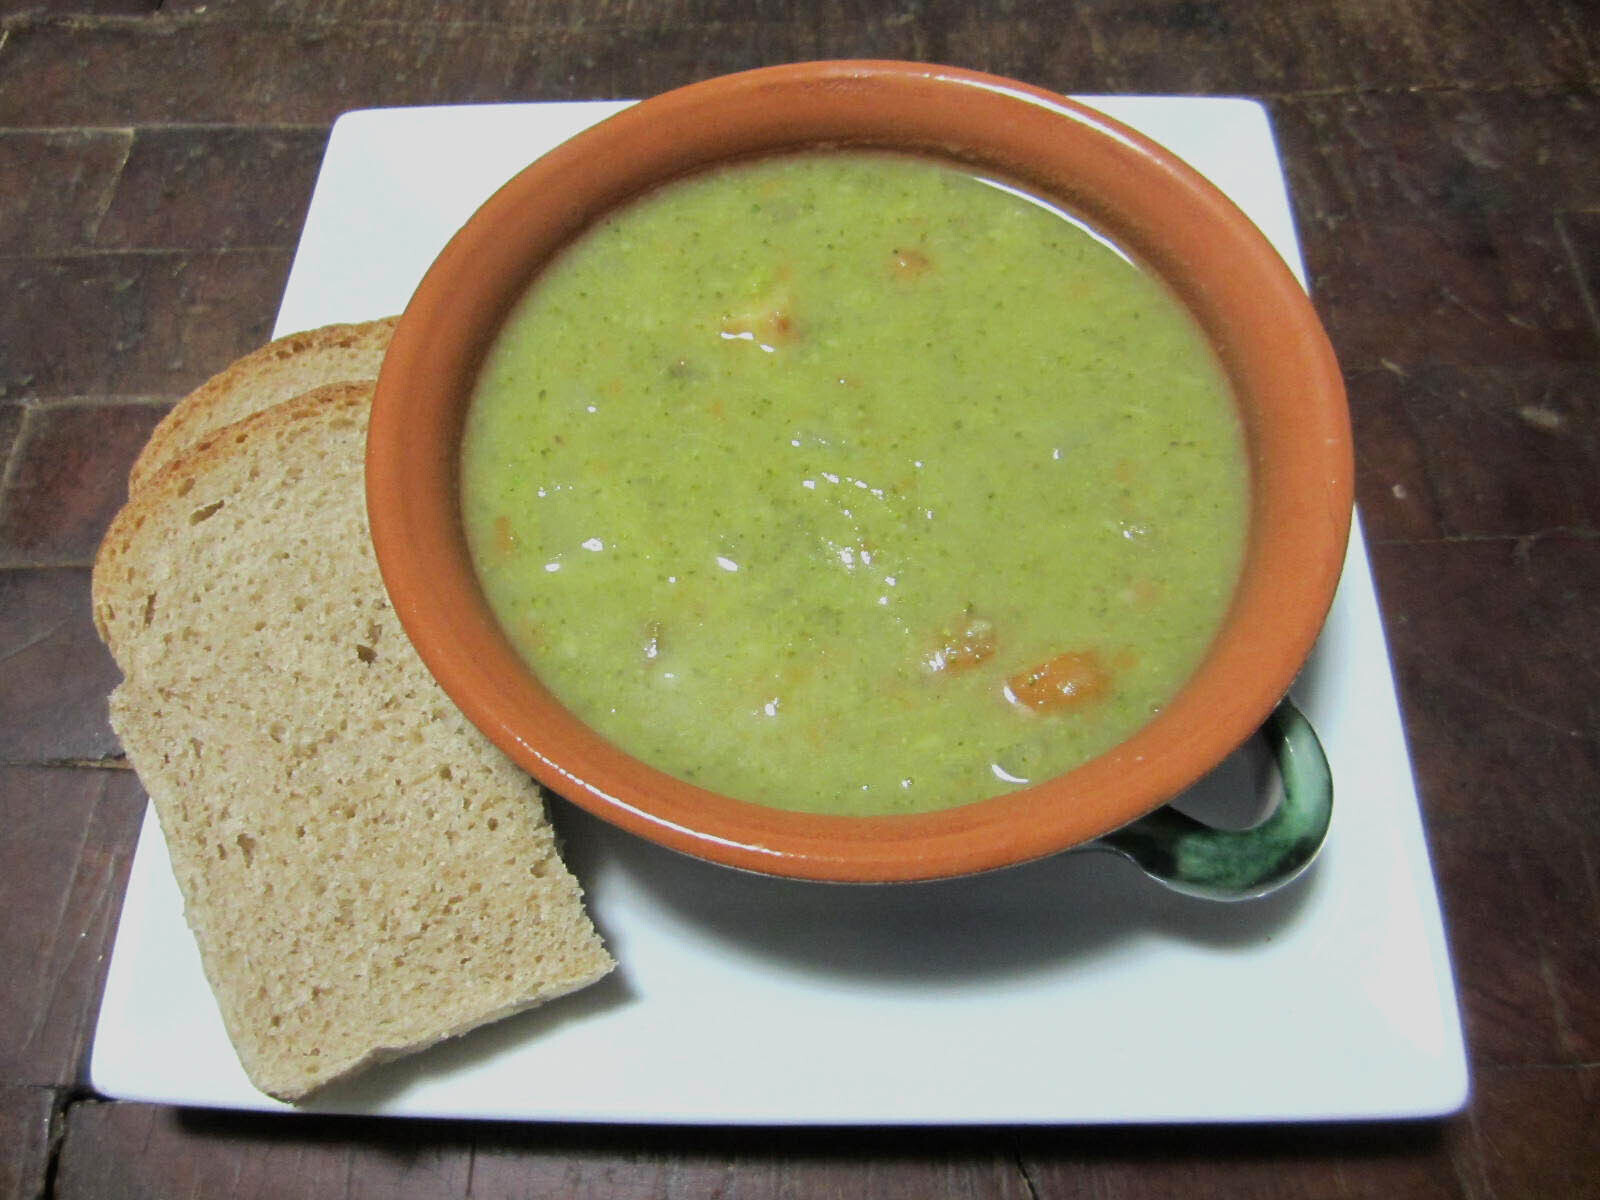 Bowl of broccoli carrot soup with two slices of bread on the side